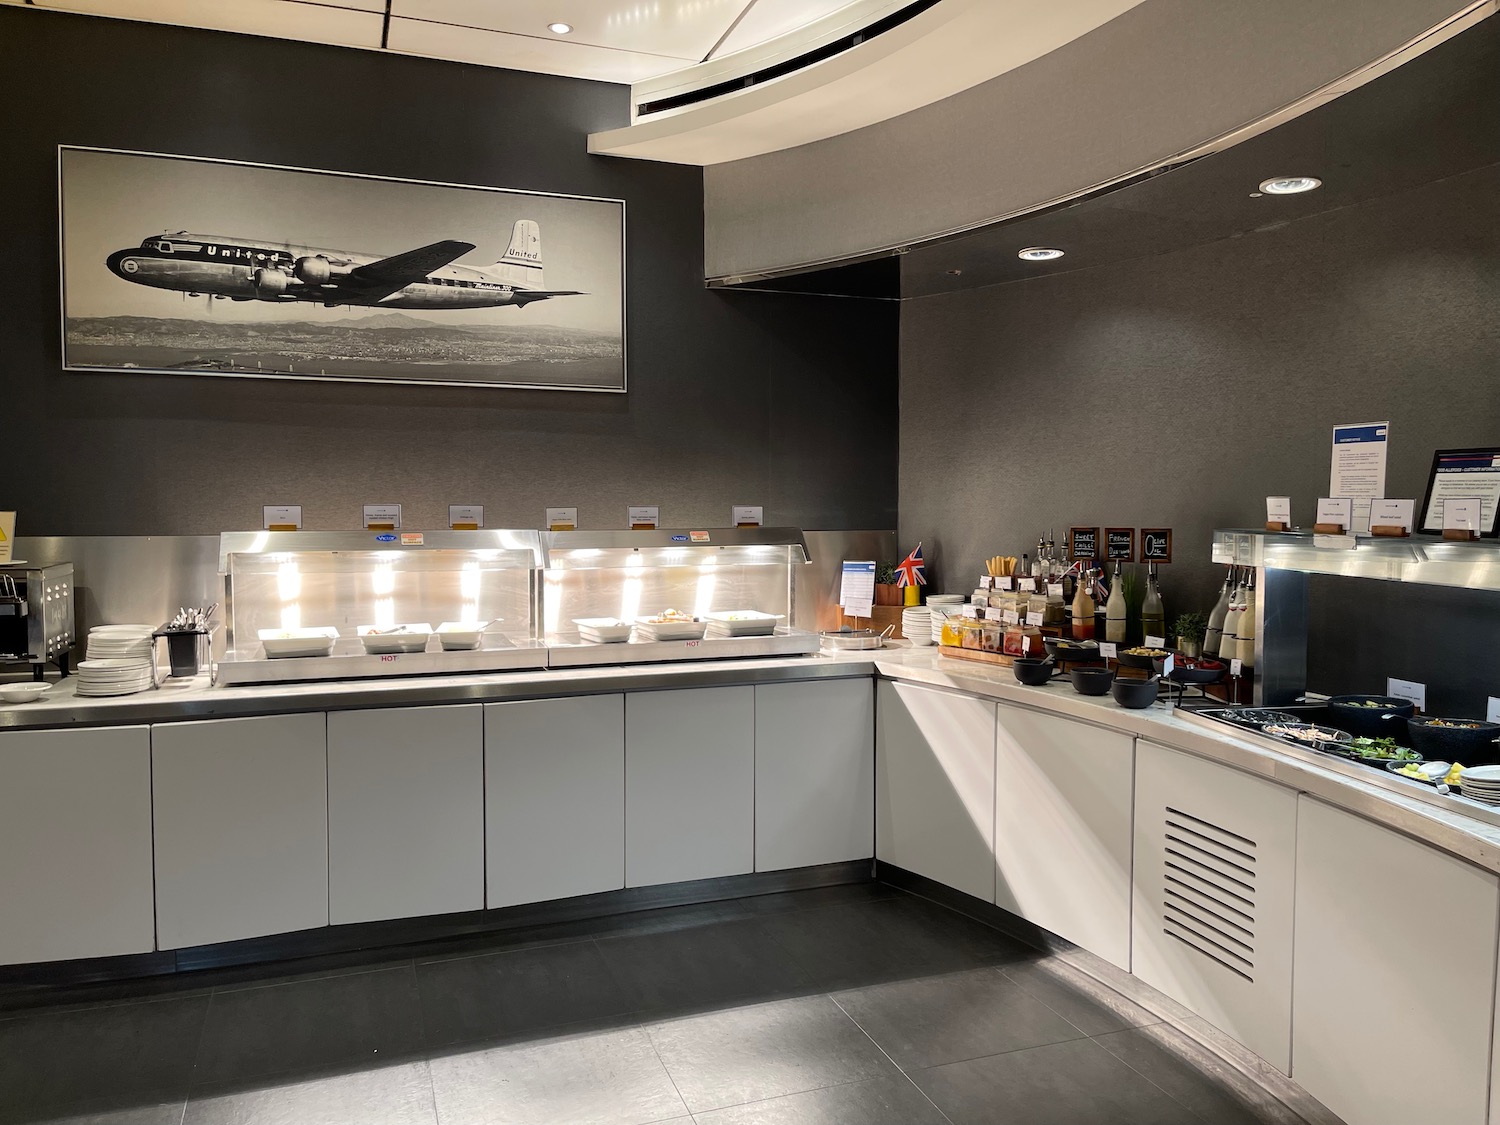 a kitchen with a large picture of an airplane